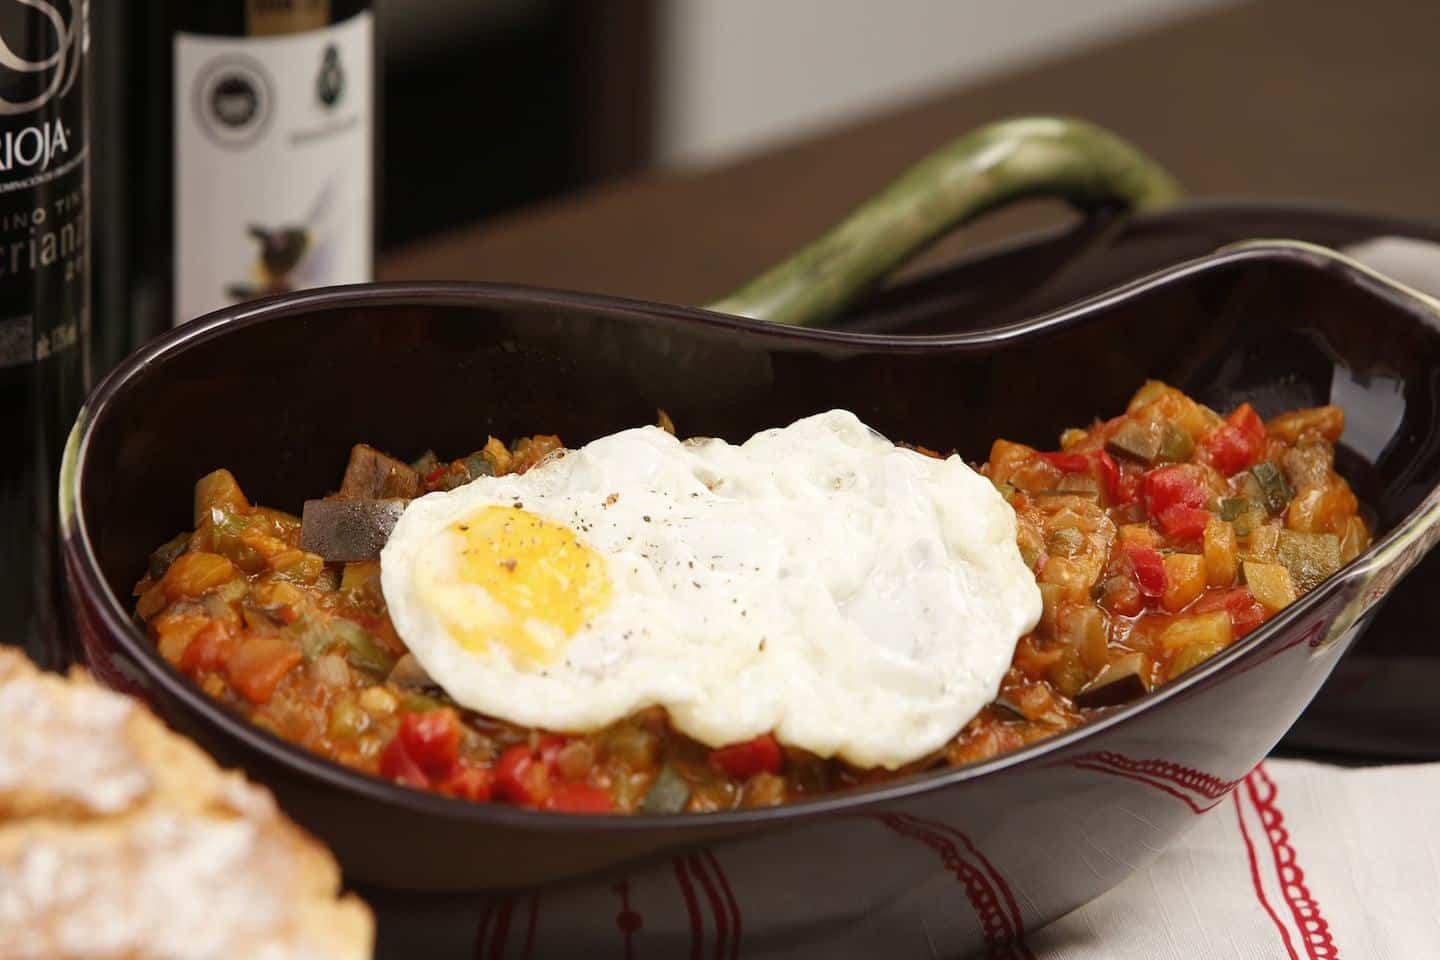 cooked vegetables with fried egg on top